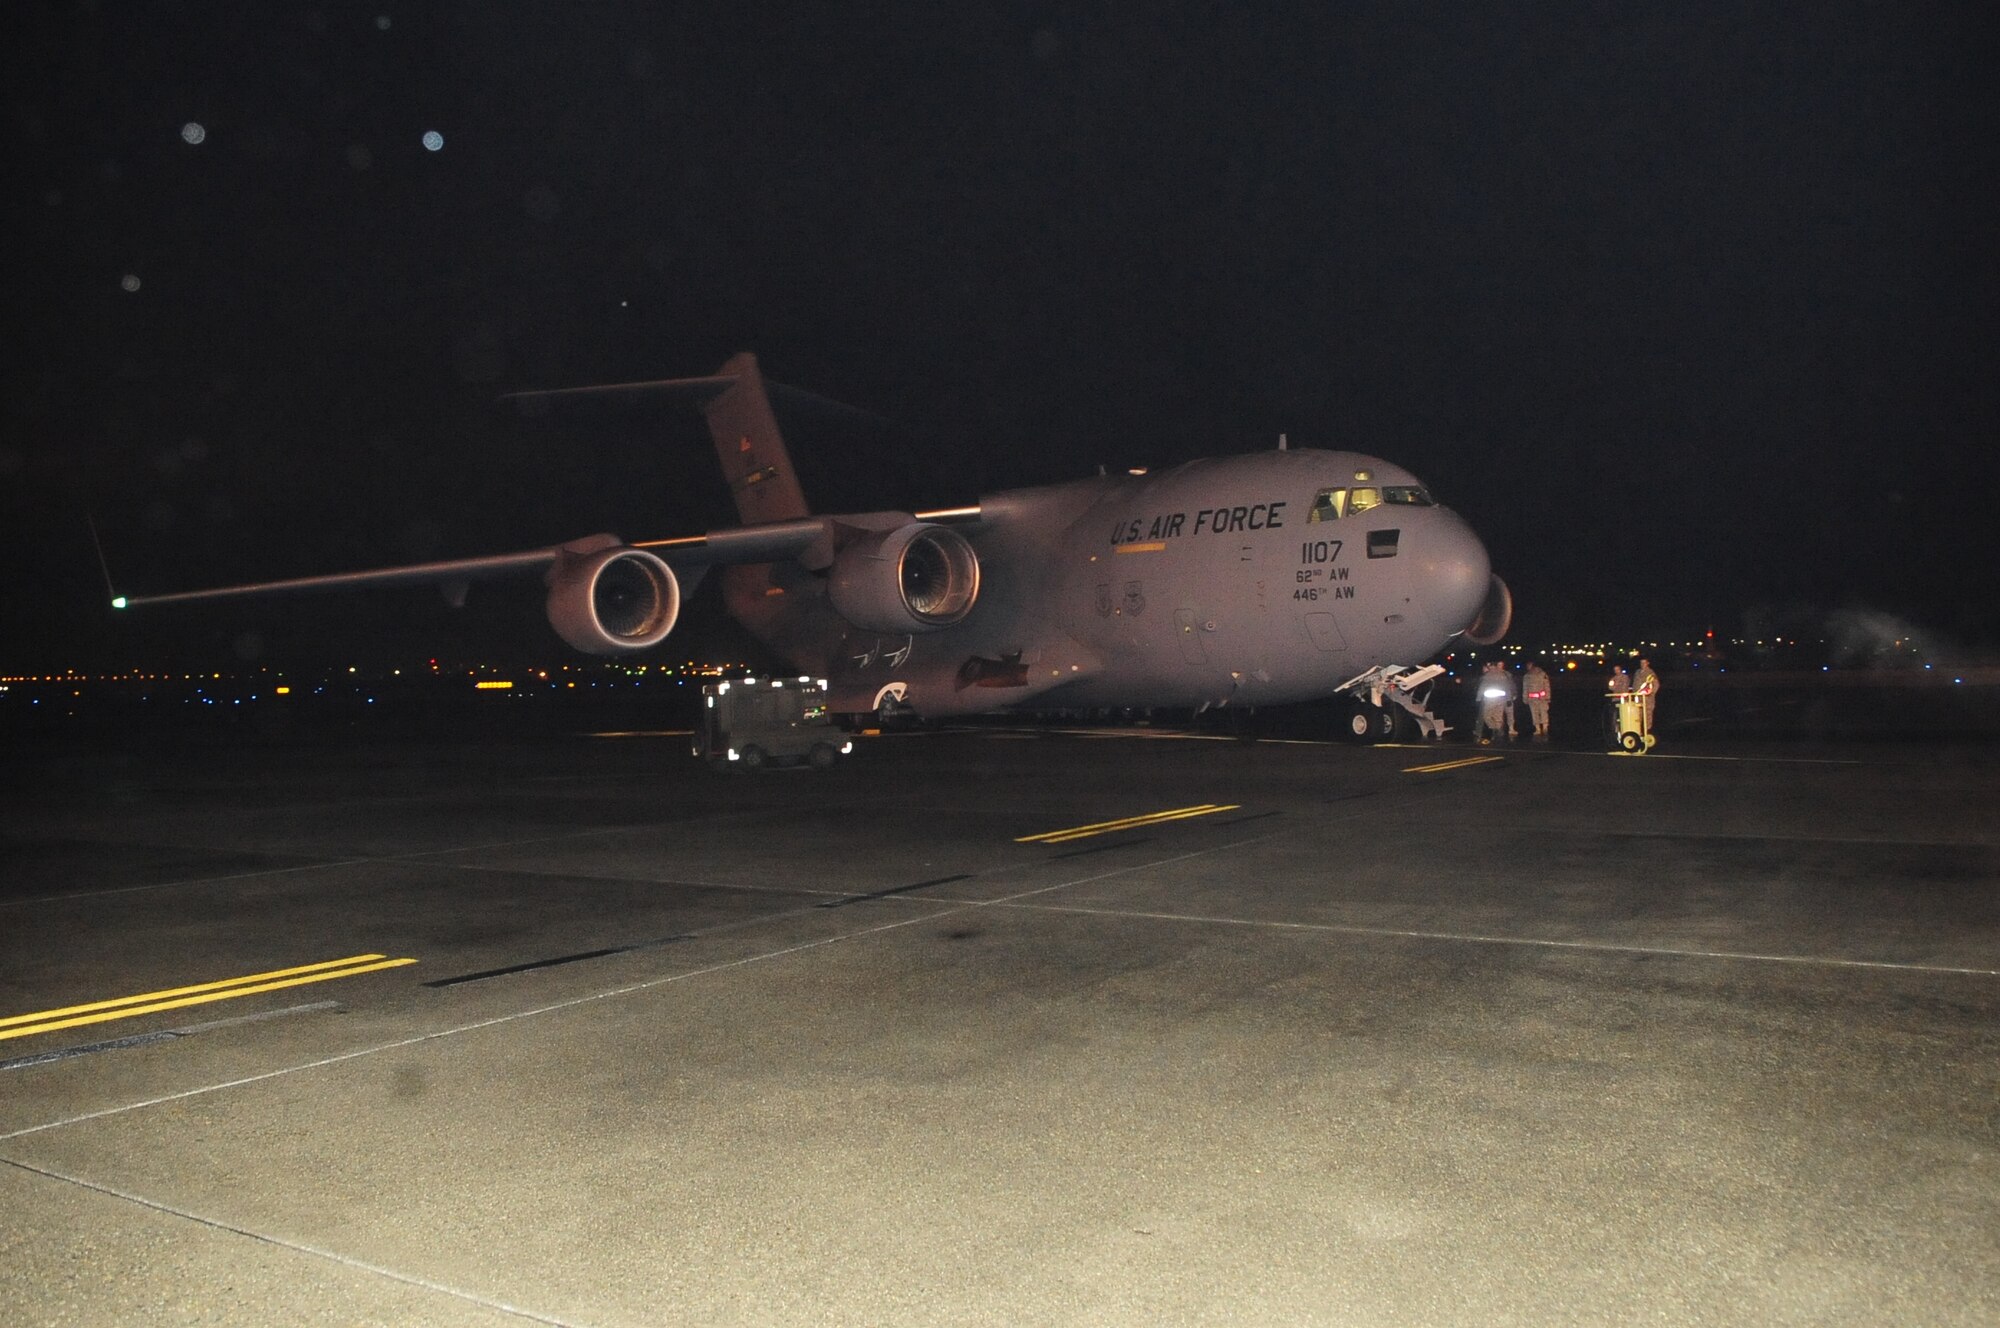 Airmen prepare a C-17 Globemaster III for departure from McChord in support of ongoing humanitarian relief efforts in Haiti. Two additional C-17s were dispatched Sunday to Pope AFB, N.C. and Charleston AFB, S.C., respectively, to pick up critical supplies and deliver them to Haiti; a fourth C-17 departed Jan. 18 for Pope.  The Charleston-bound aircraft carried two additional augmented aircrews to be assigned to other C-17s supporting the relief effort from Charleston.  All aircraft departed Haiti with evacuees. (Courtesy photo)